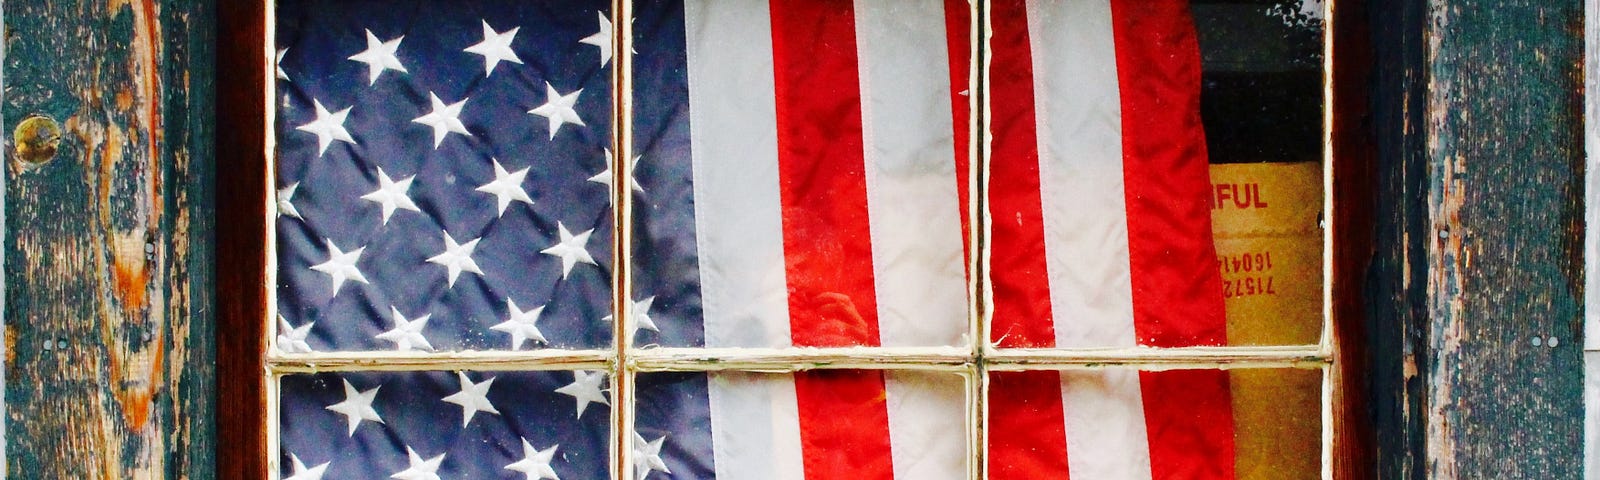 American flag behind a window in a distressed house.